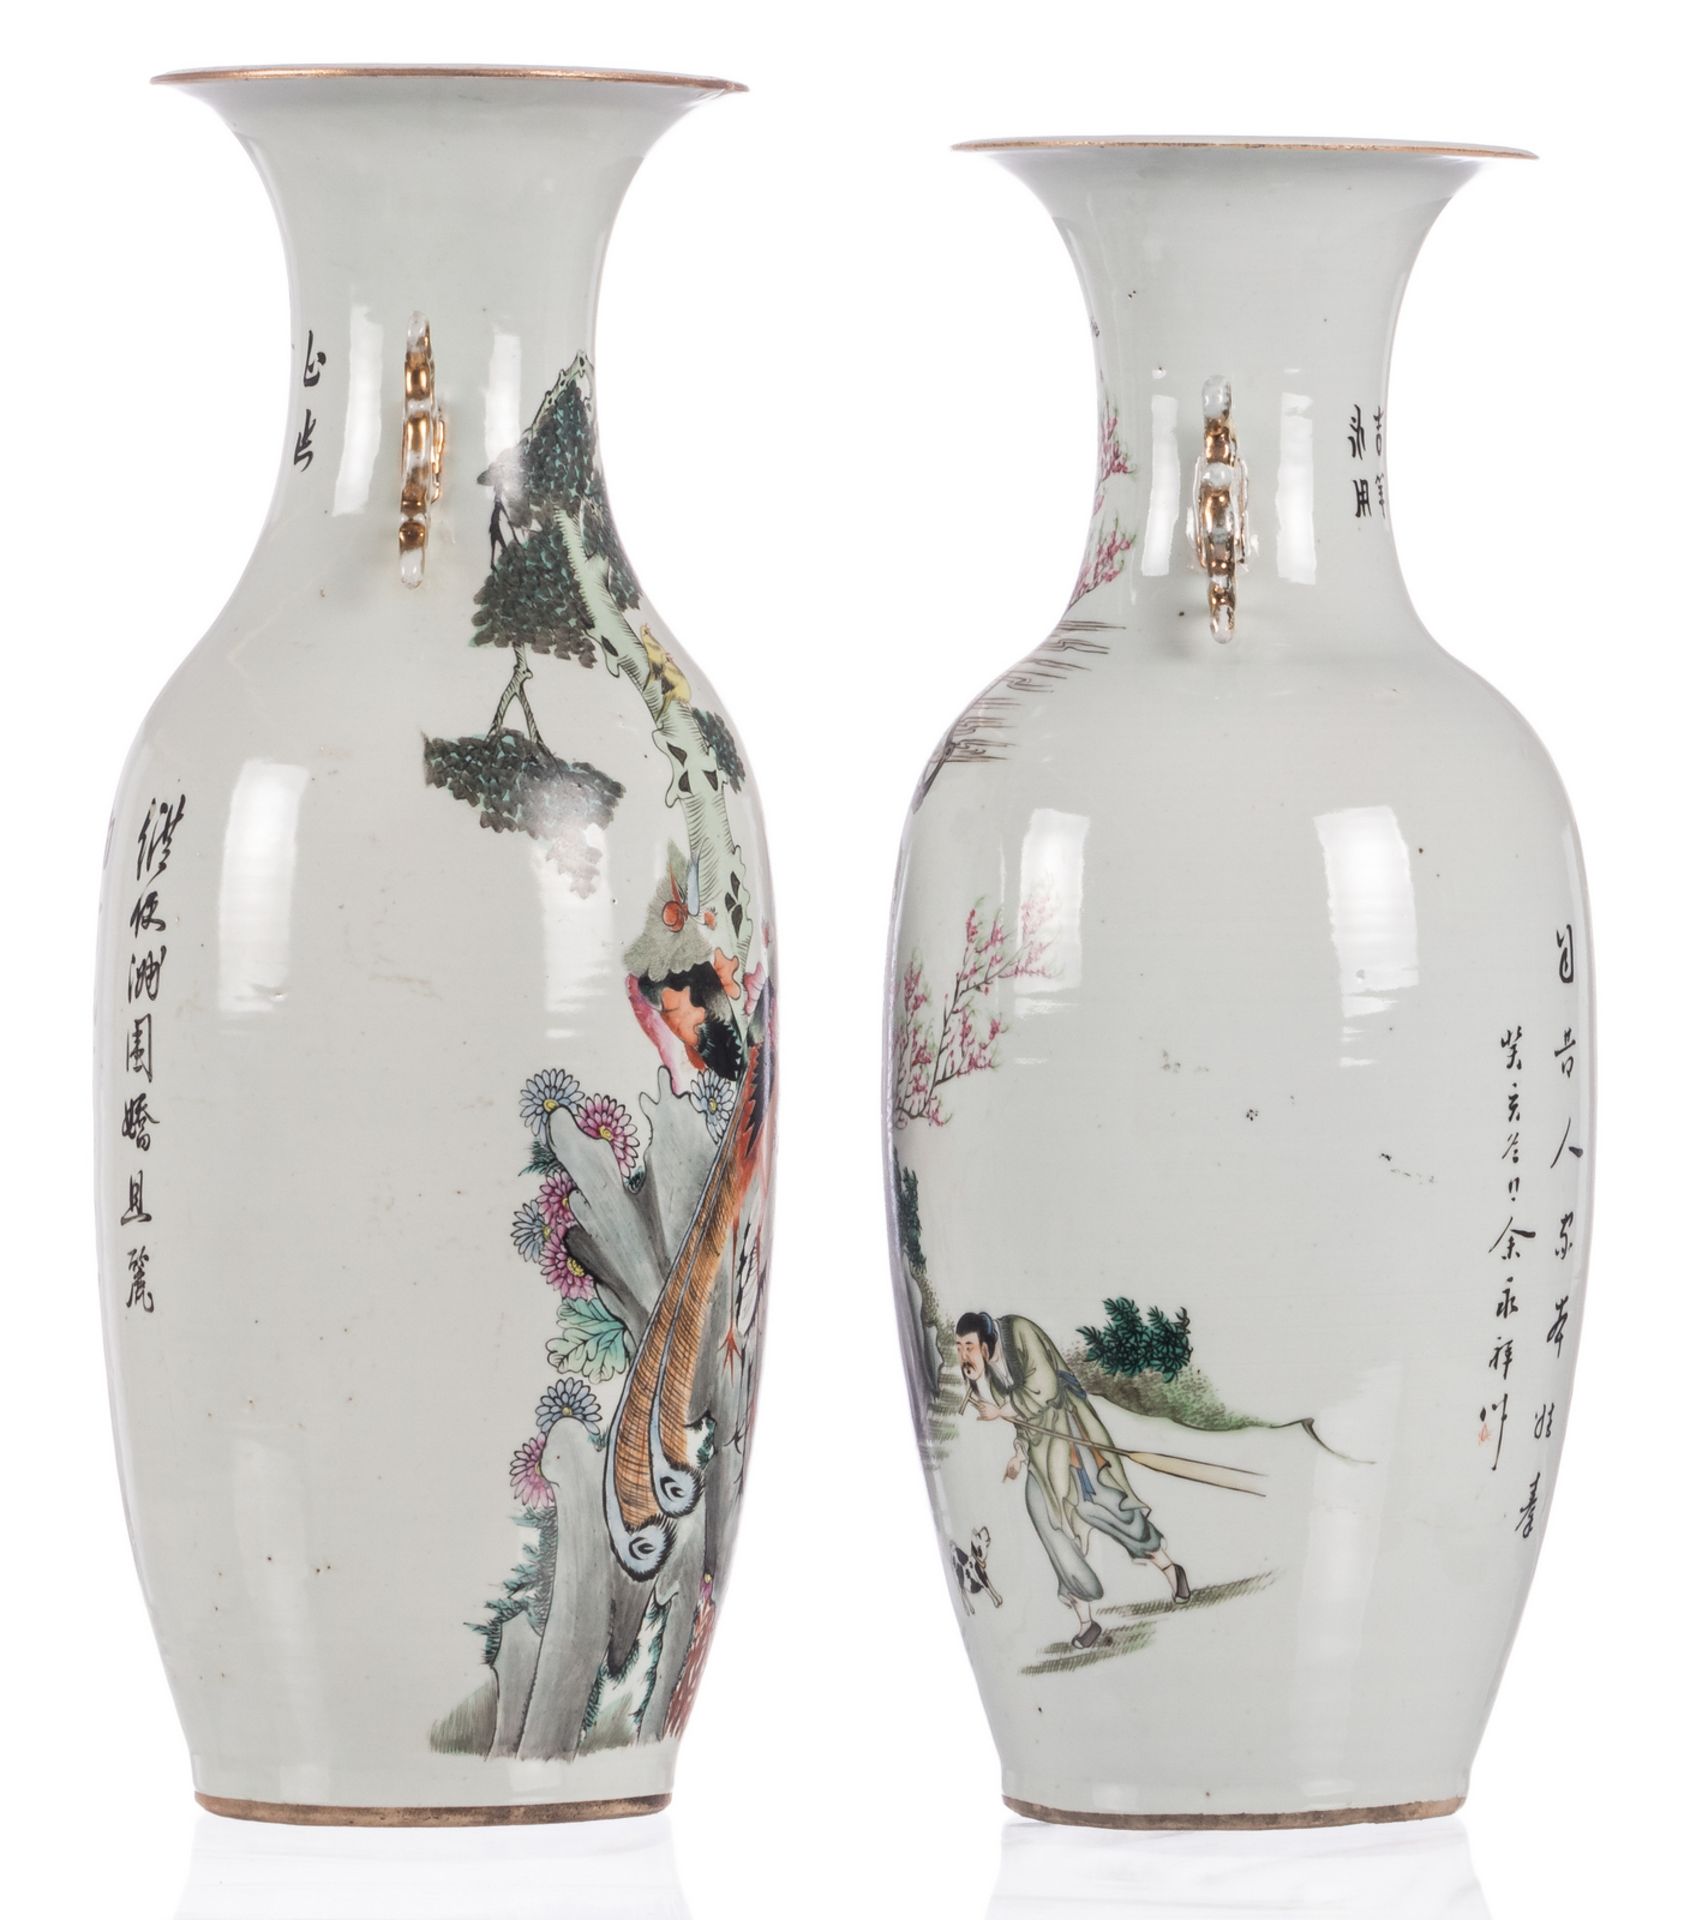 Two Chinese famille rose vases, one vase decorated with an animated scene and calligraphic texts and - Image 4 of 6